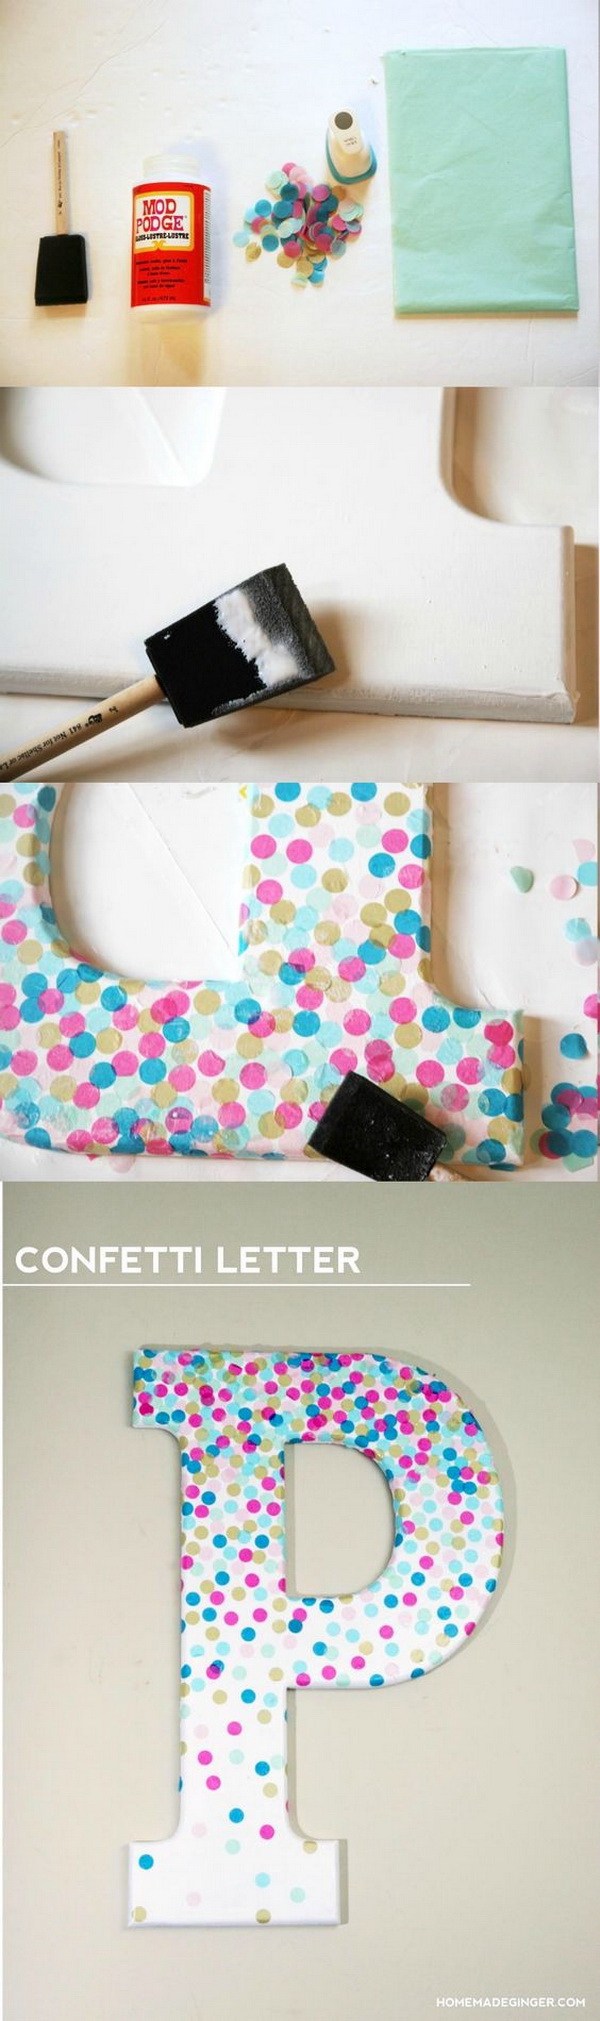 DIY Confetti Letter For Home Decor: Use a letter, Mod Podge, and real confetti to make cool decor project! Perfect for a kids' room or craft studio. 